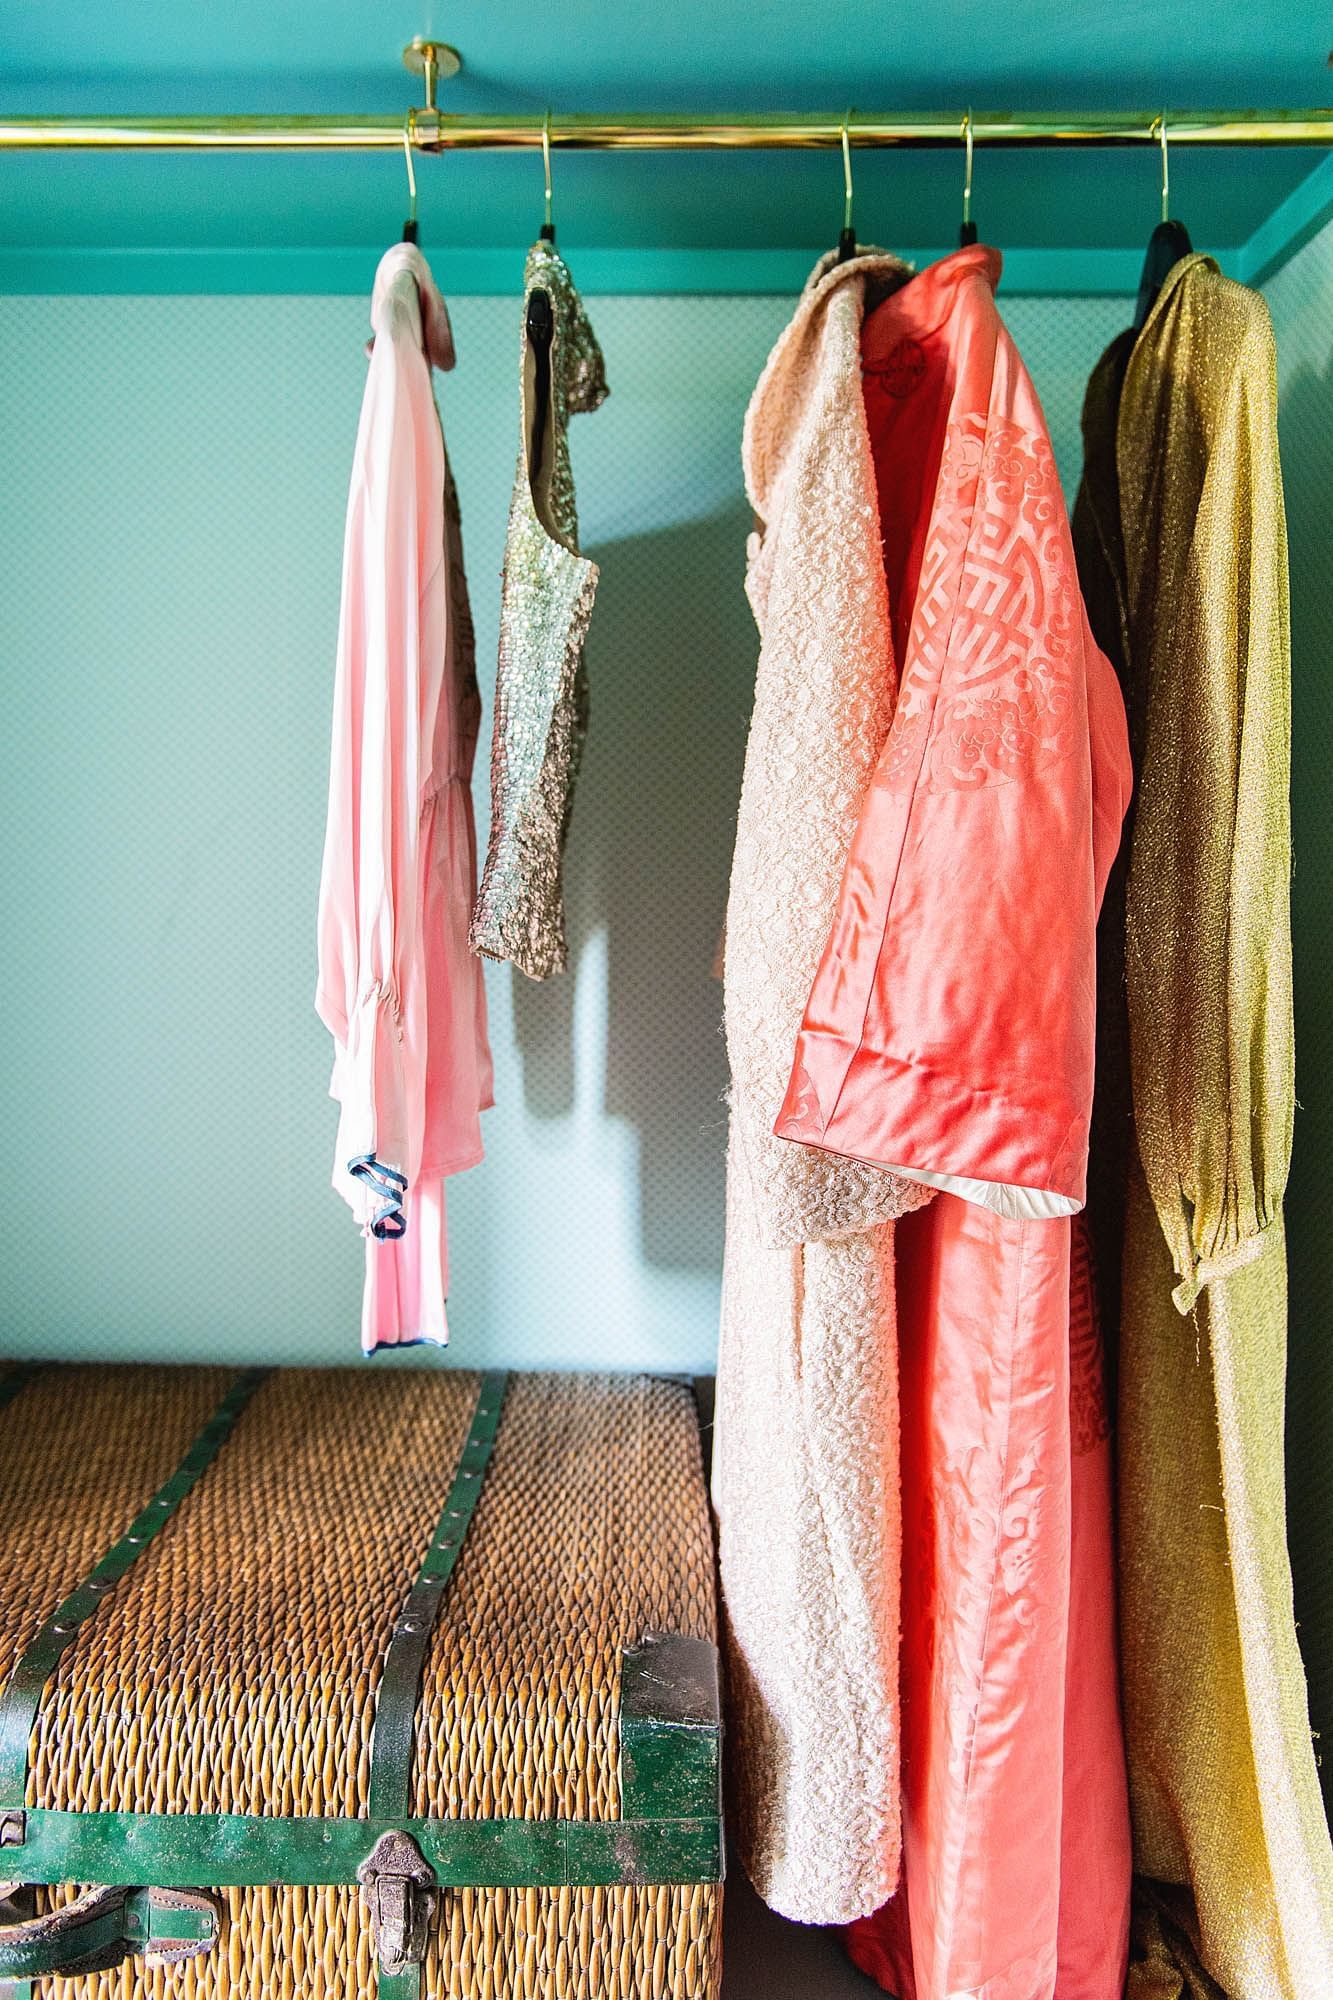 robes hanging in closet